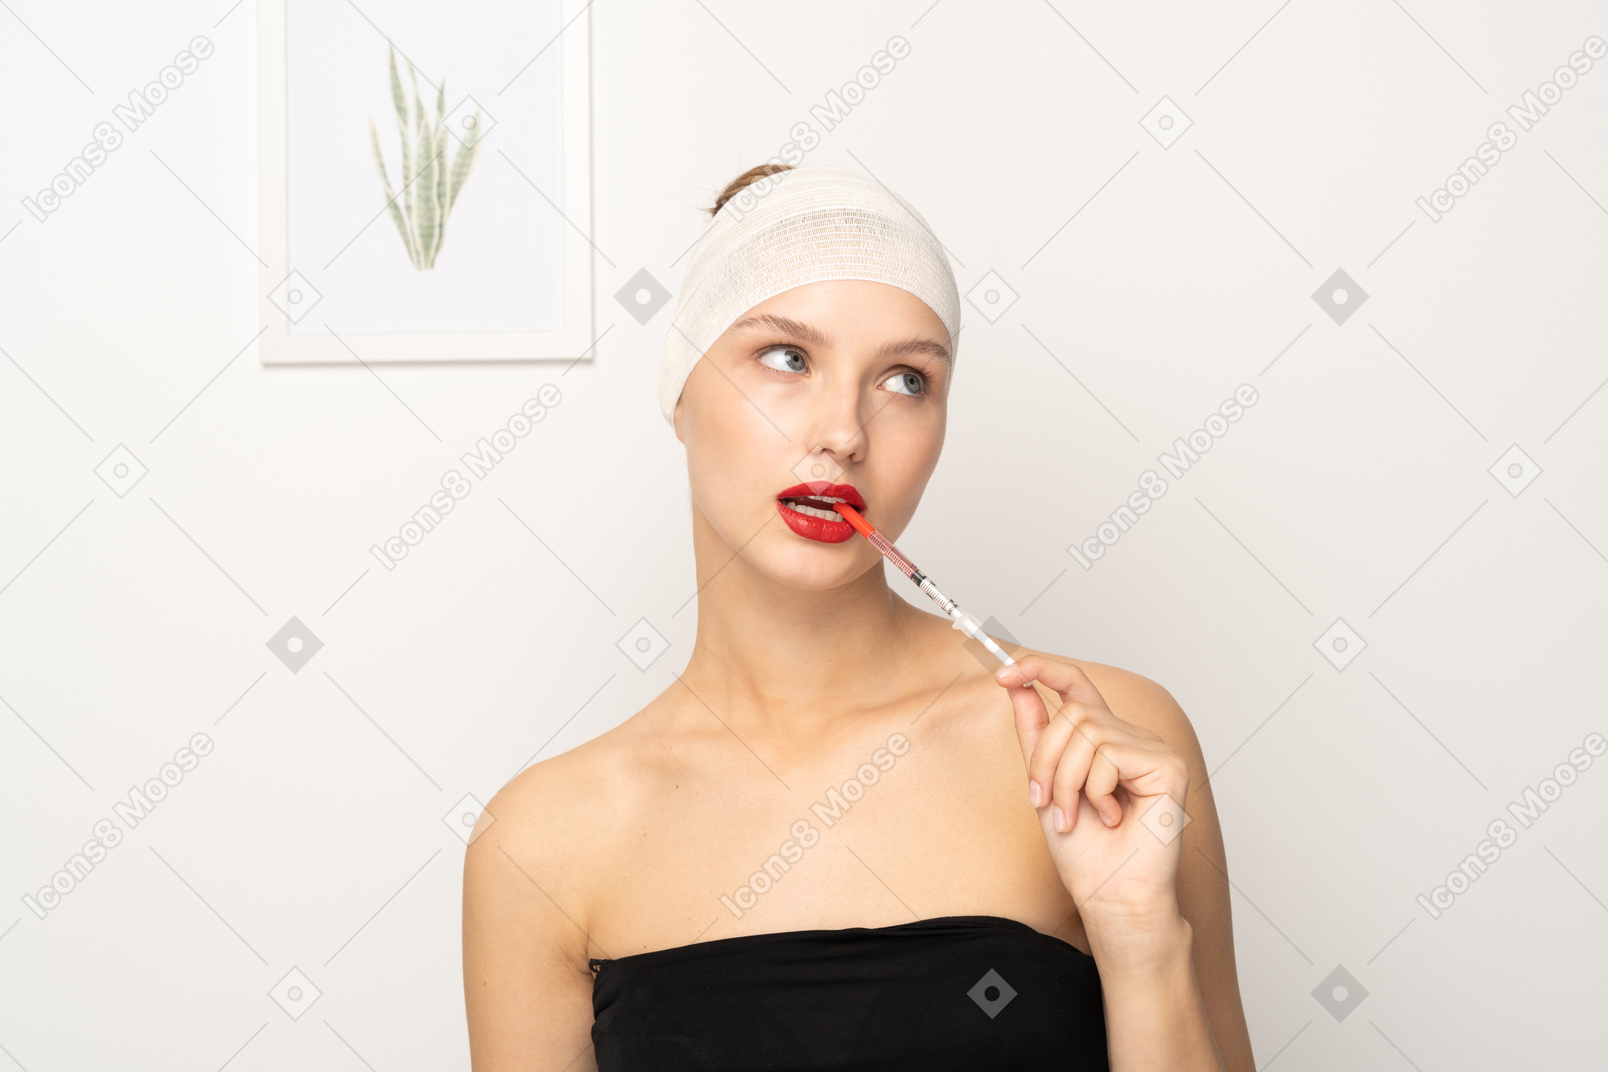 Portrait of a young woman sticking syringe into her mouth